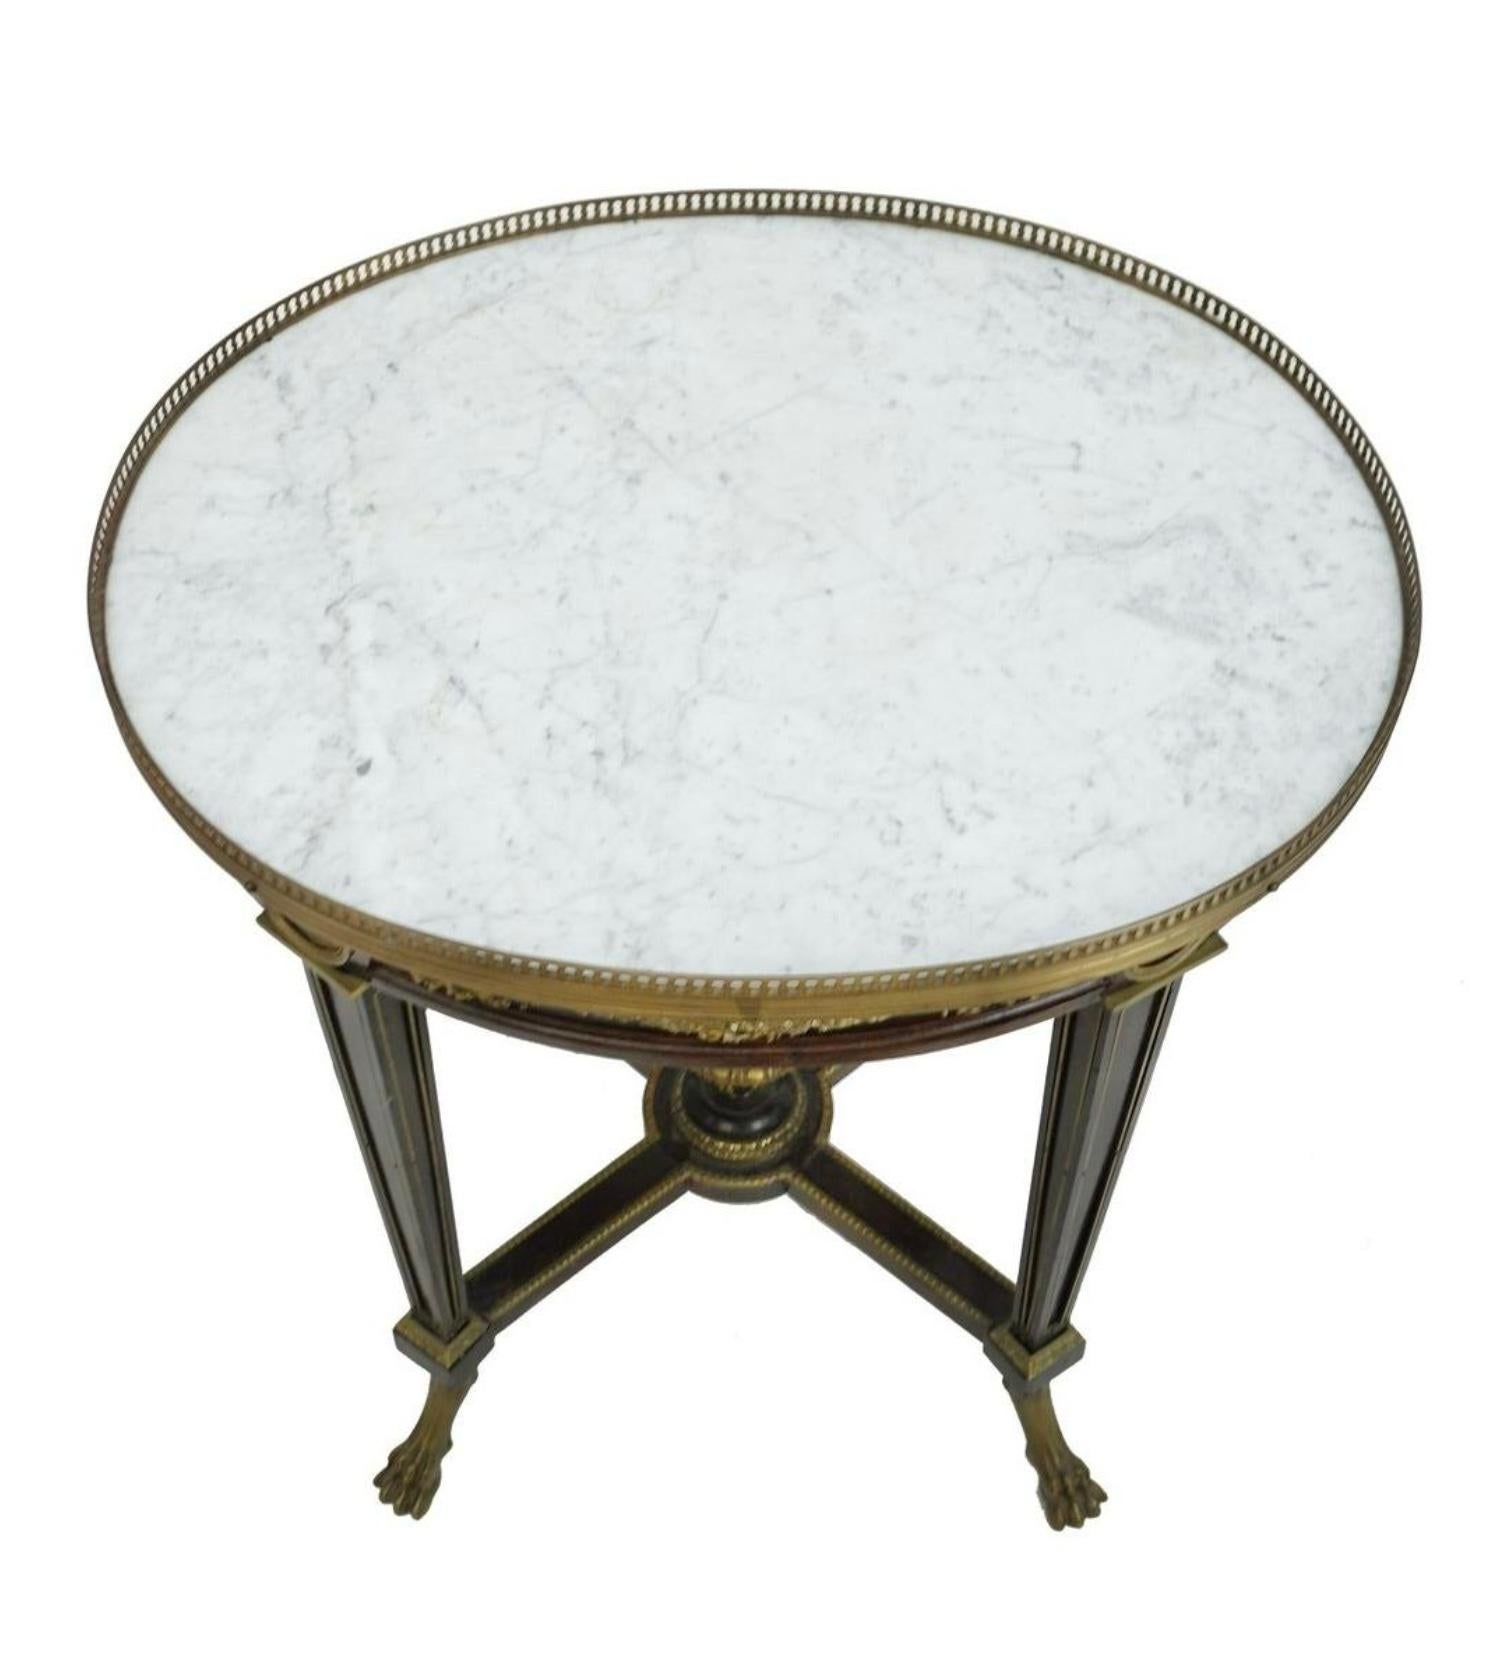 Belle Epoque Louis XVI Style Bronze Mounted Oval Side Table. Late 19 century, ornately designed with garlands and ribbons, figural scene medallions on apron, X-form stretcher with urn, and stands on fluted tapering legs with bronze lion paw feet.